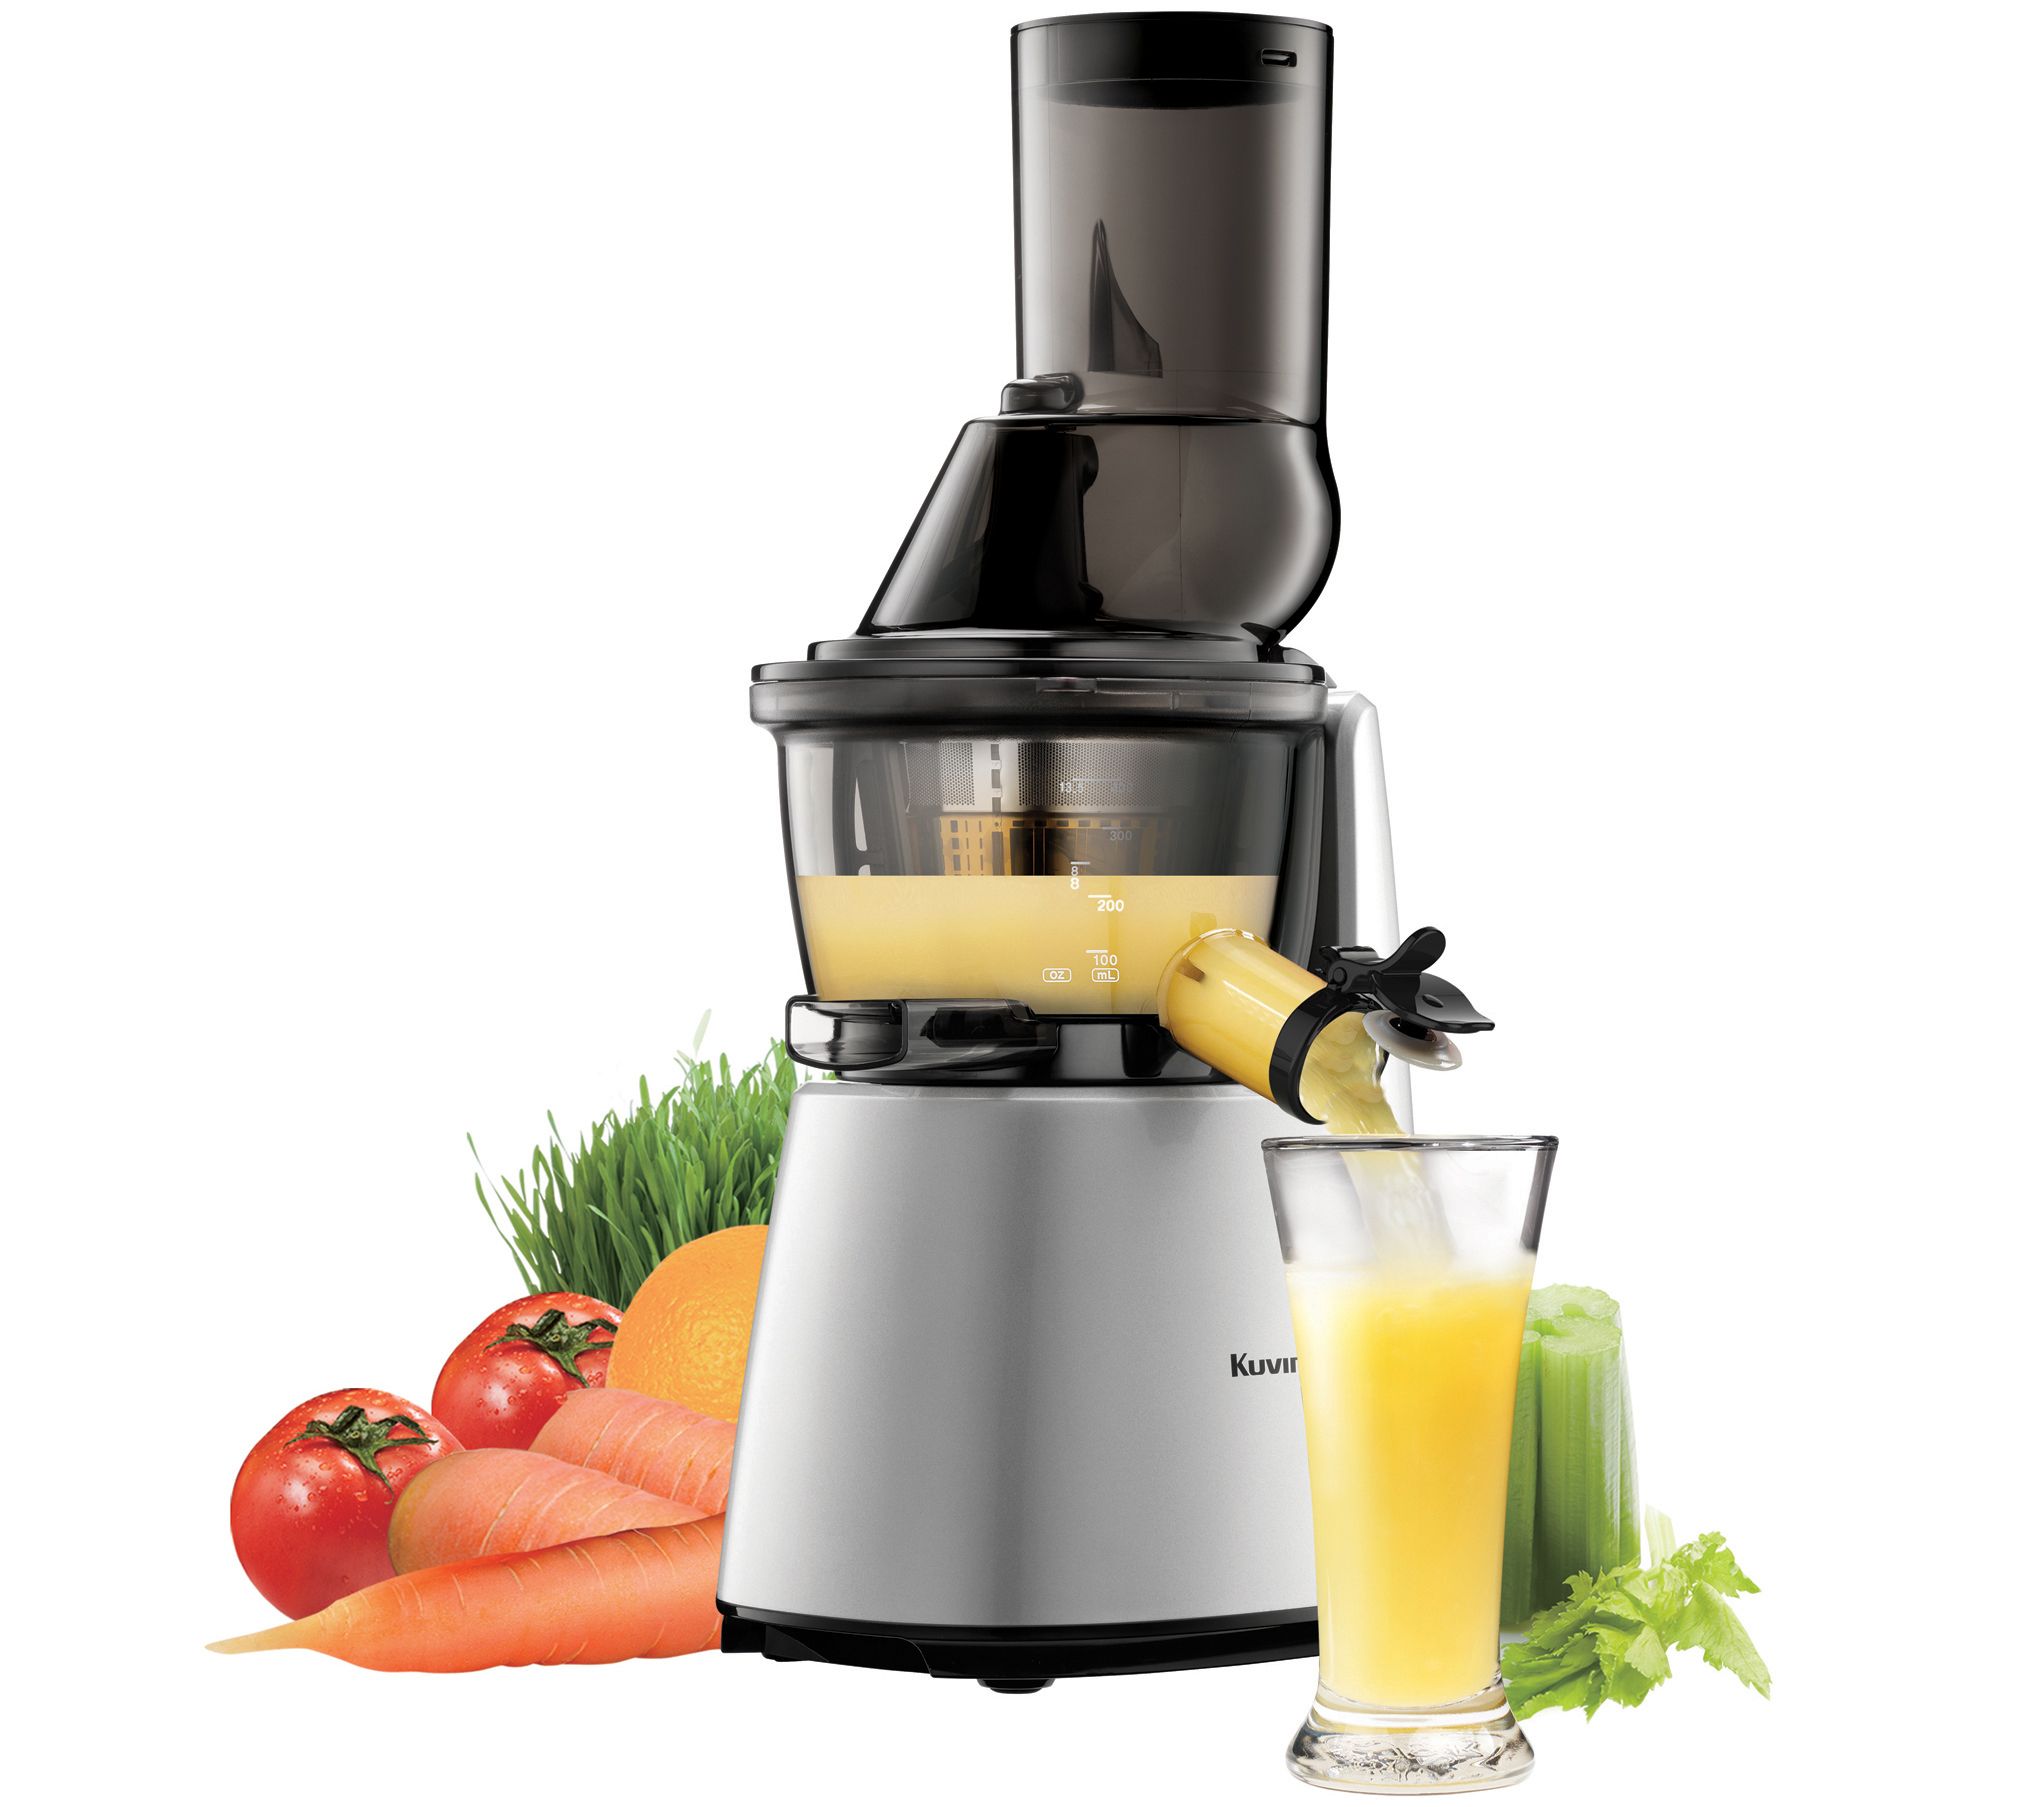 Kuvings 830 slow juicer  Cleaning Tips & tricks pt.1 #kuvings